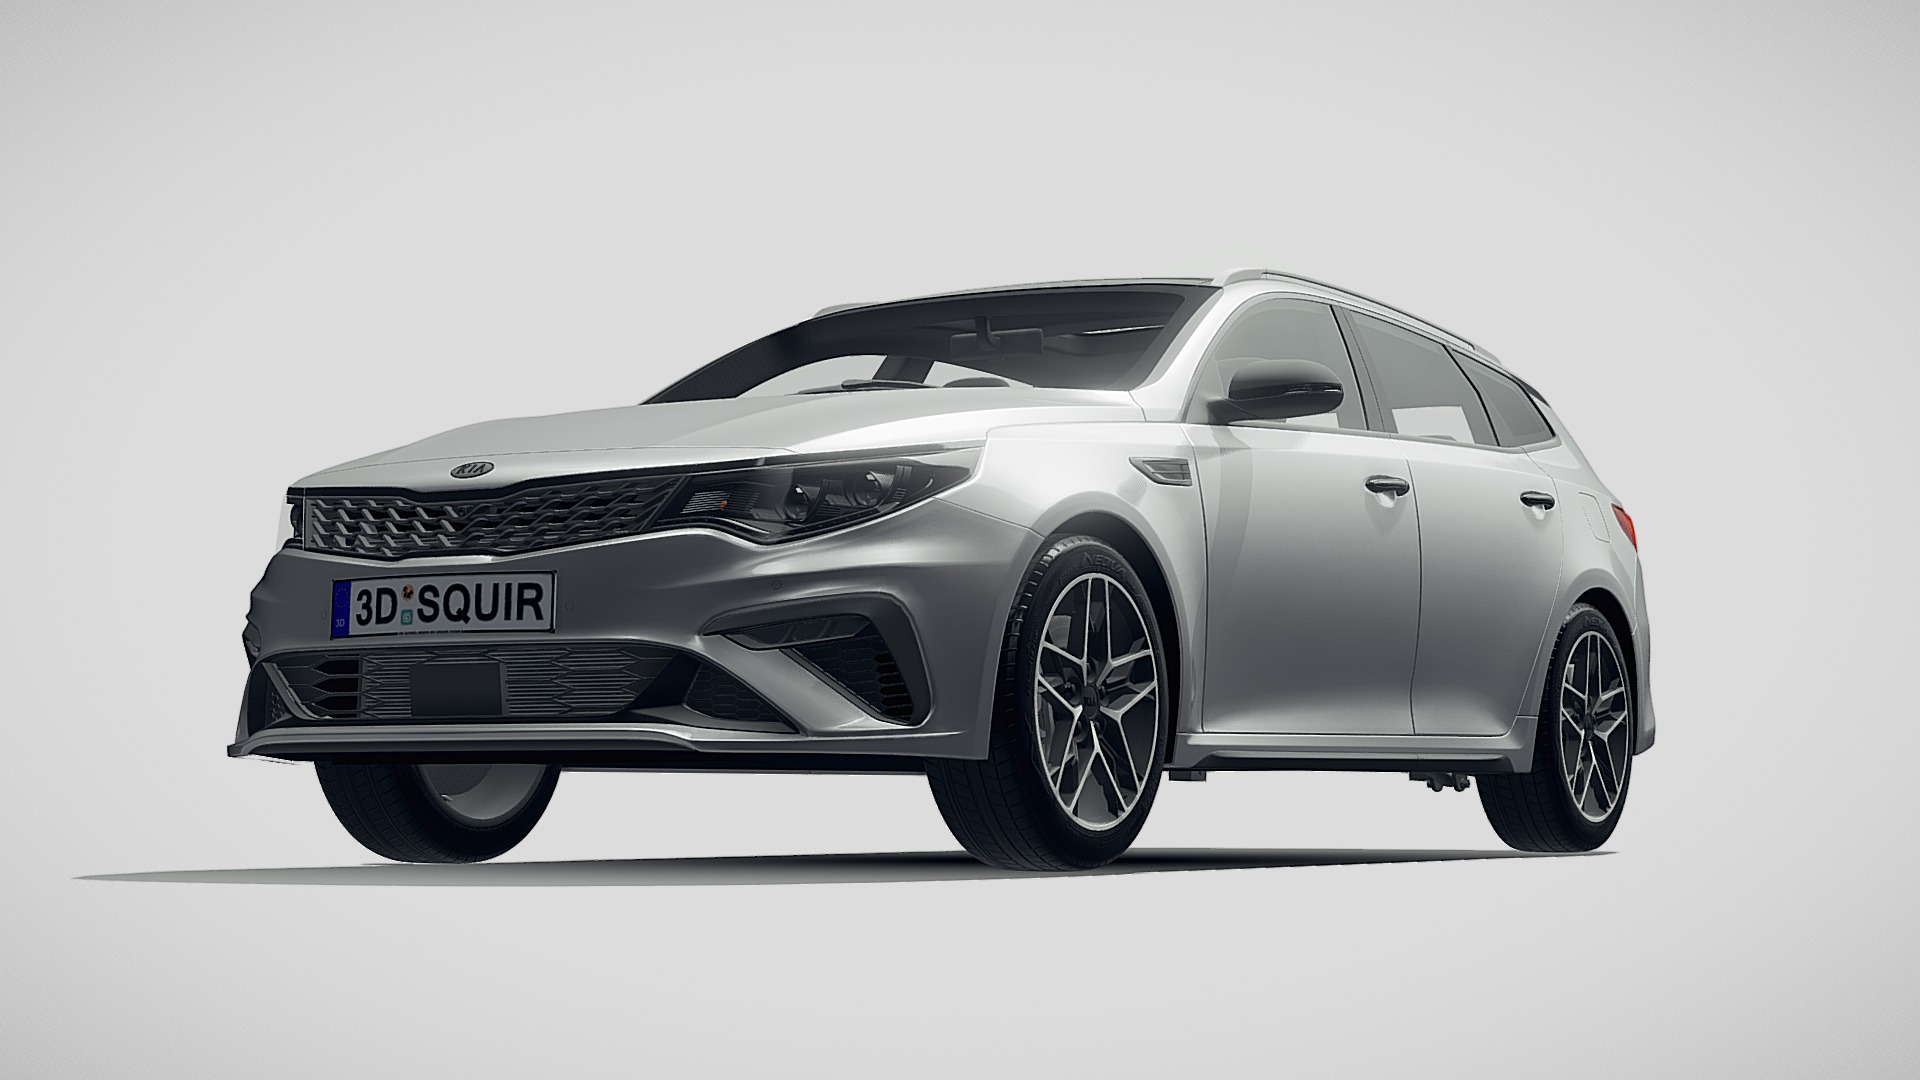 3D model Kia Optima Sportswagon 2019 - This is a 3D model of the Kia Optima Sportswagon 2019. The 3D model is about a silver car with a black background.